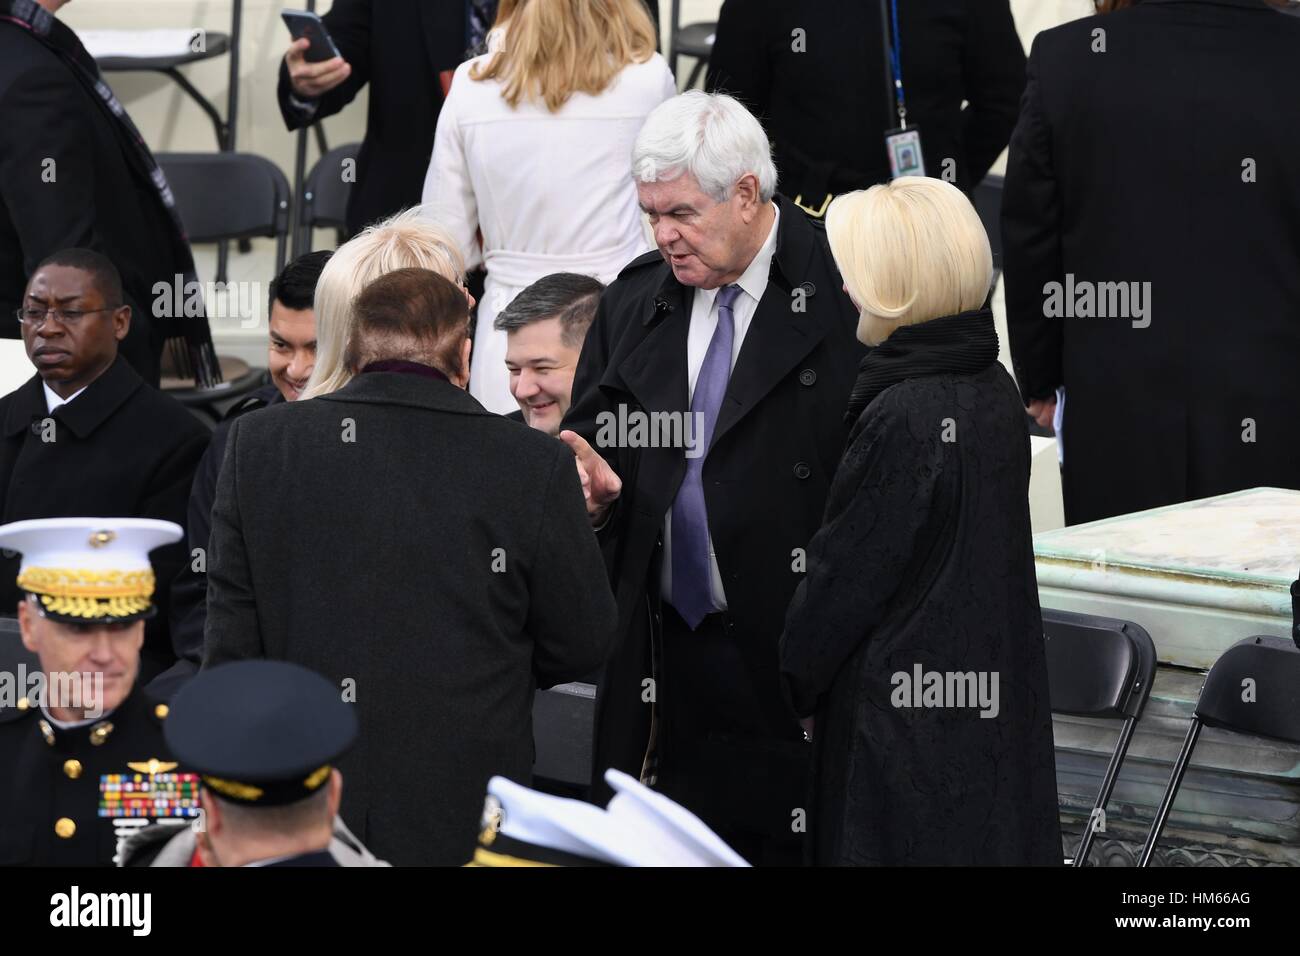 Former House Speaker Newt Gingrich and his wife Callista Gingrich chat with American casino magnate Sheldon Adelson before the start of the Inauguration of President-elect Donald Trump as the 45th President on Capitol Hill January 20, 2017 in Washington, DC. Stock Photo